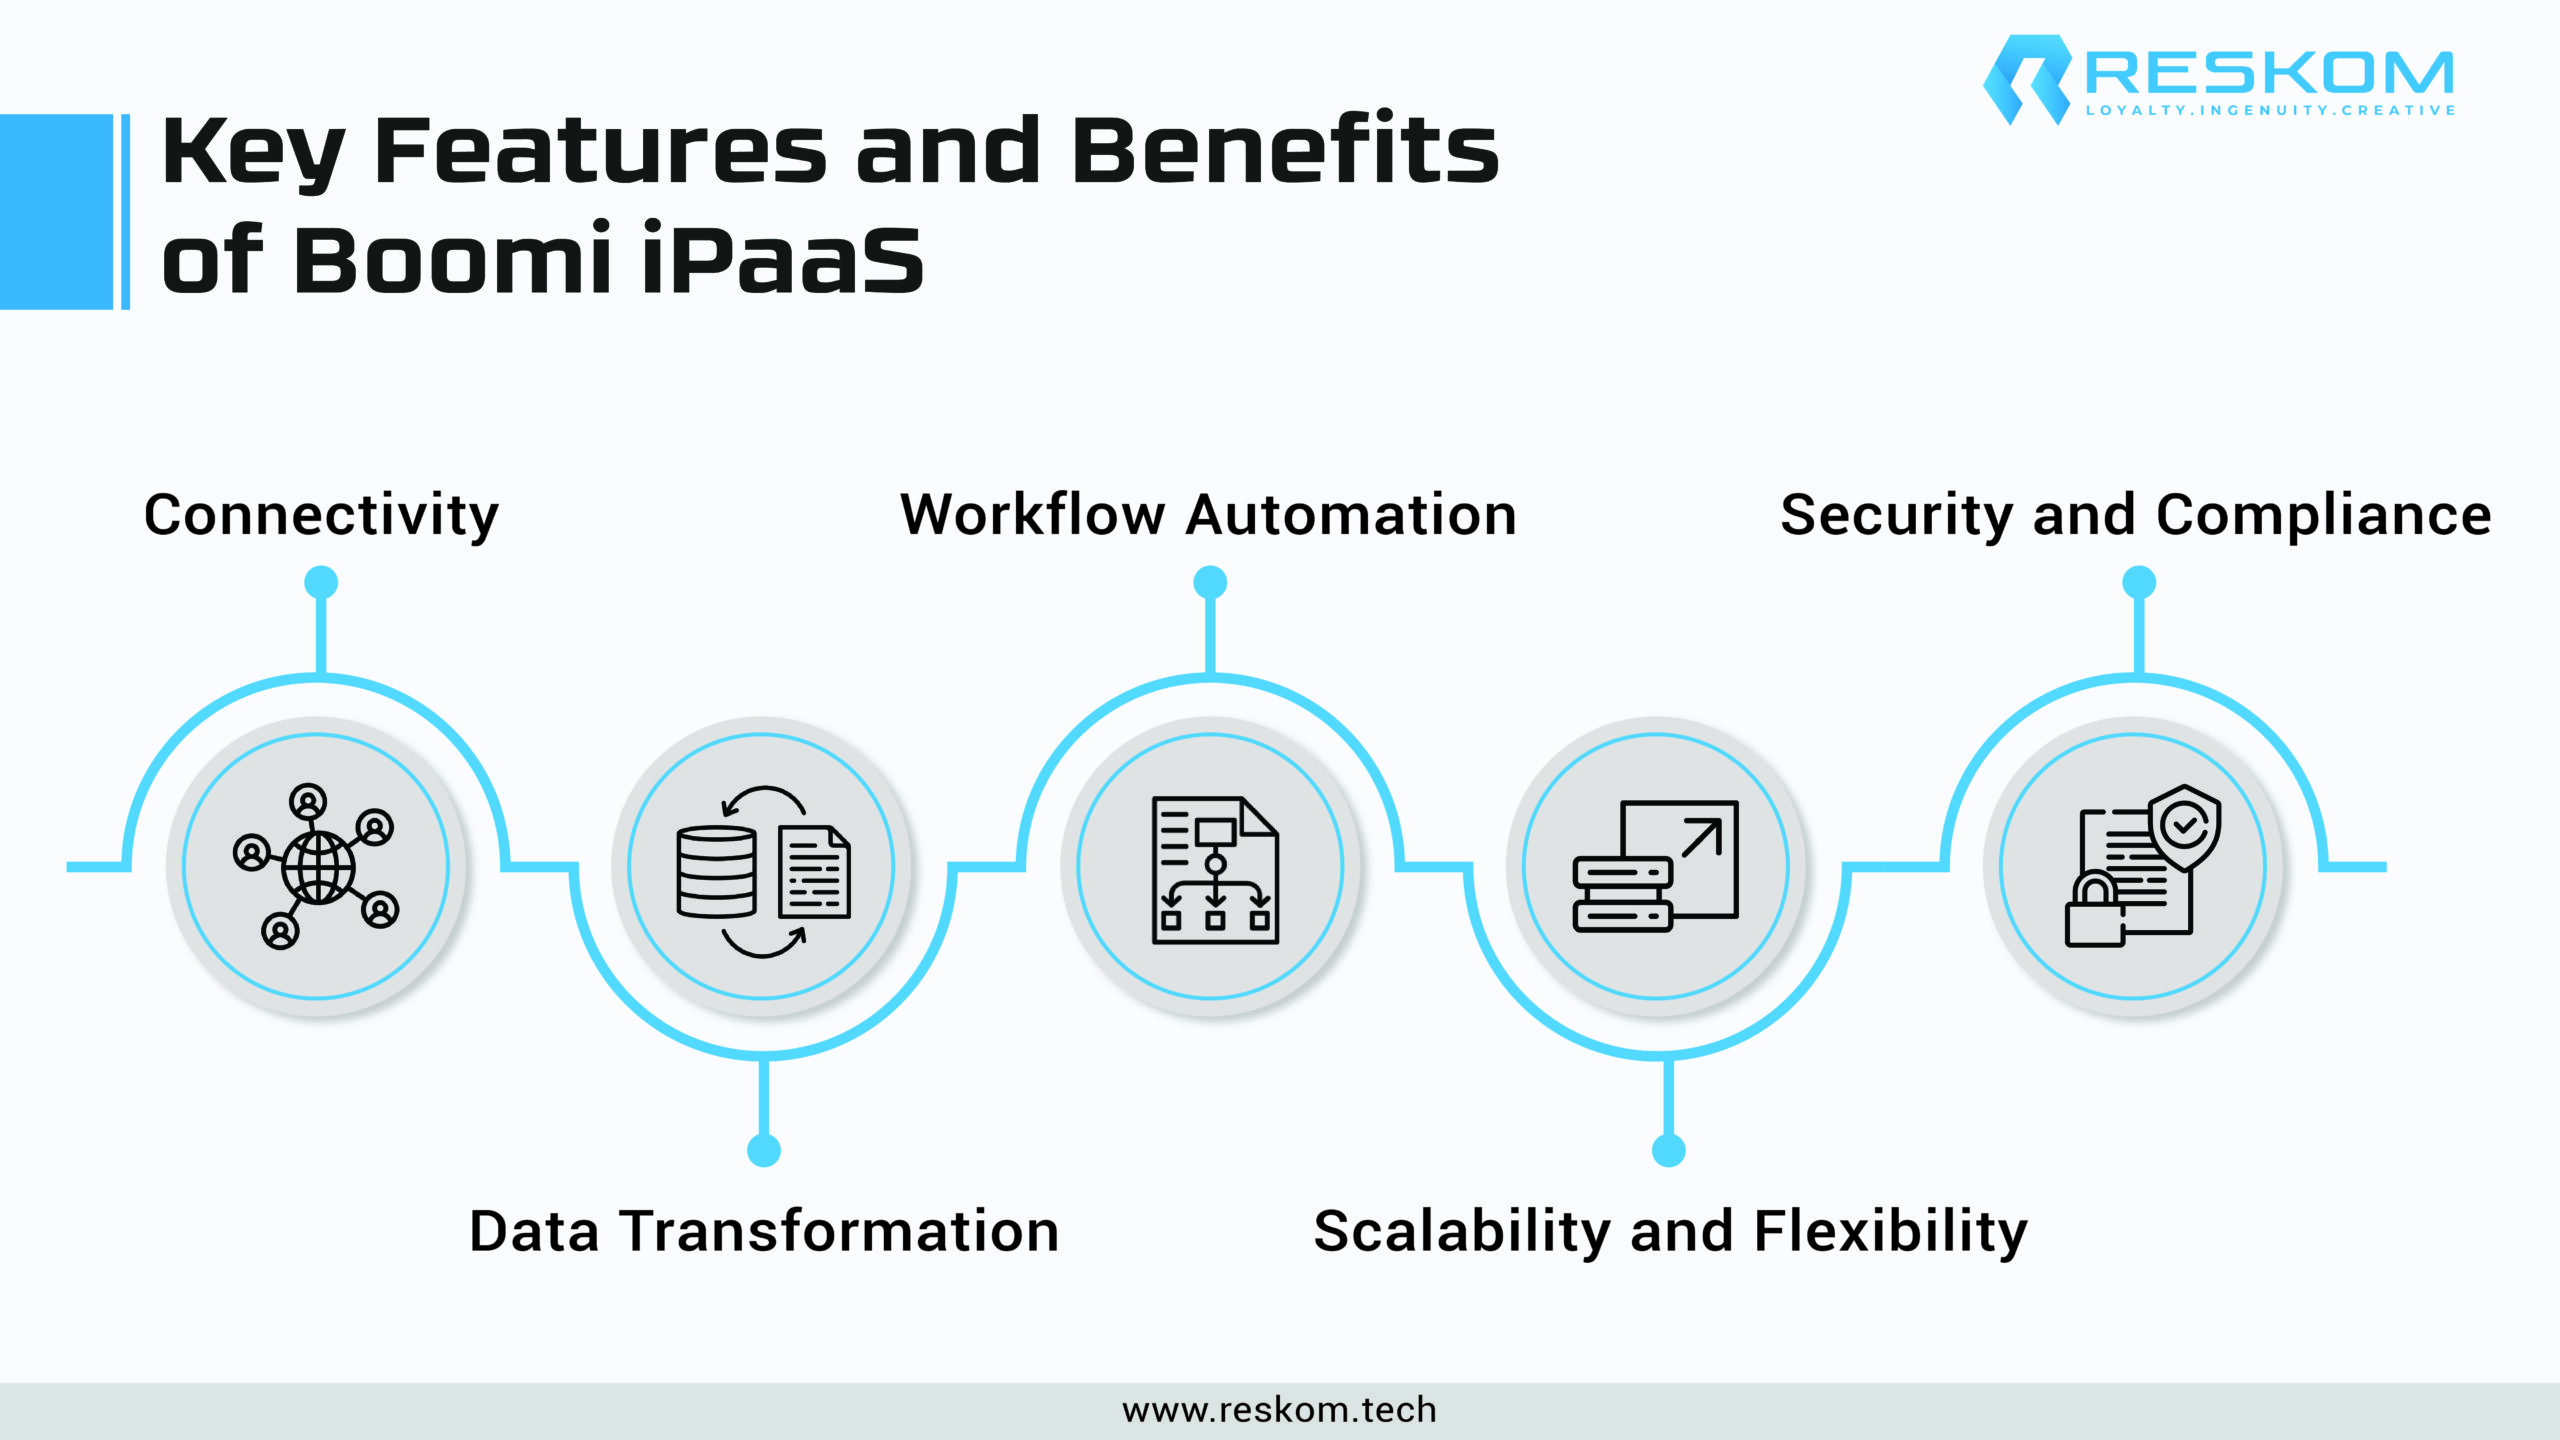 Key Features and Benefits of Boomi iPaaS-01-01